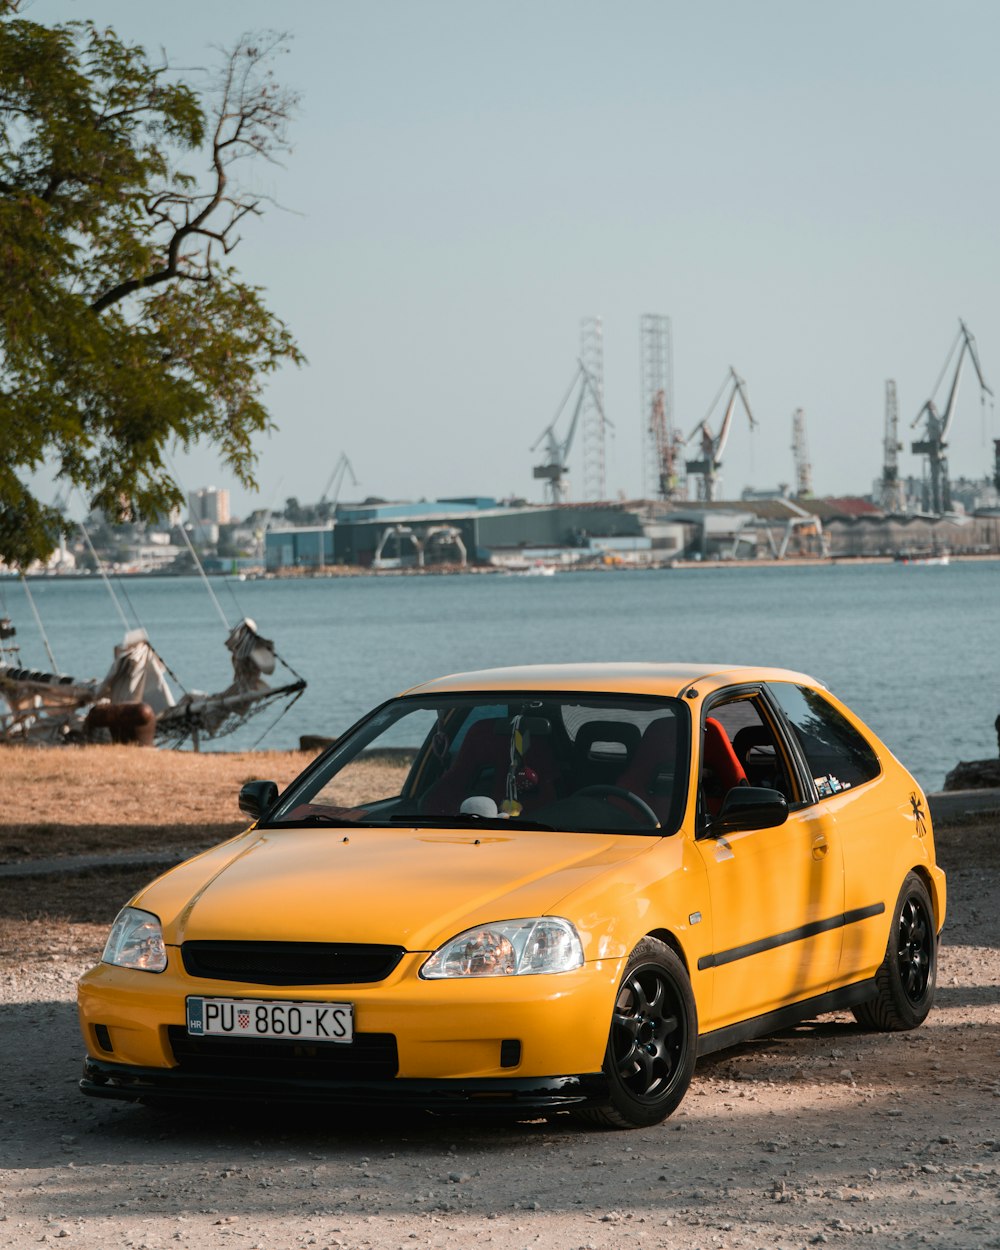 a yellow car parked in front of a body of water